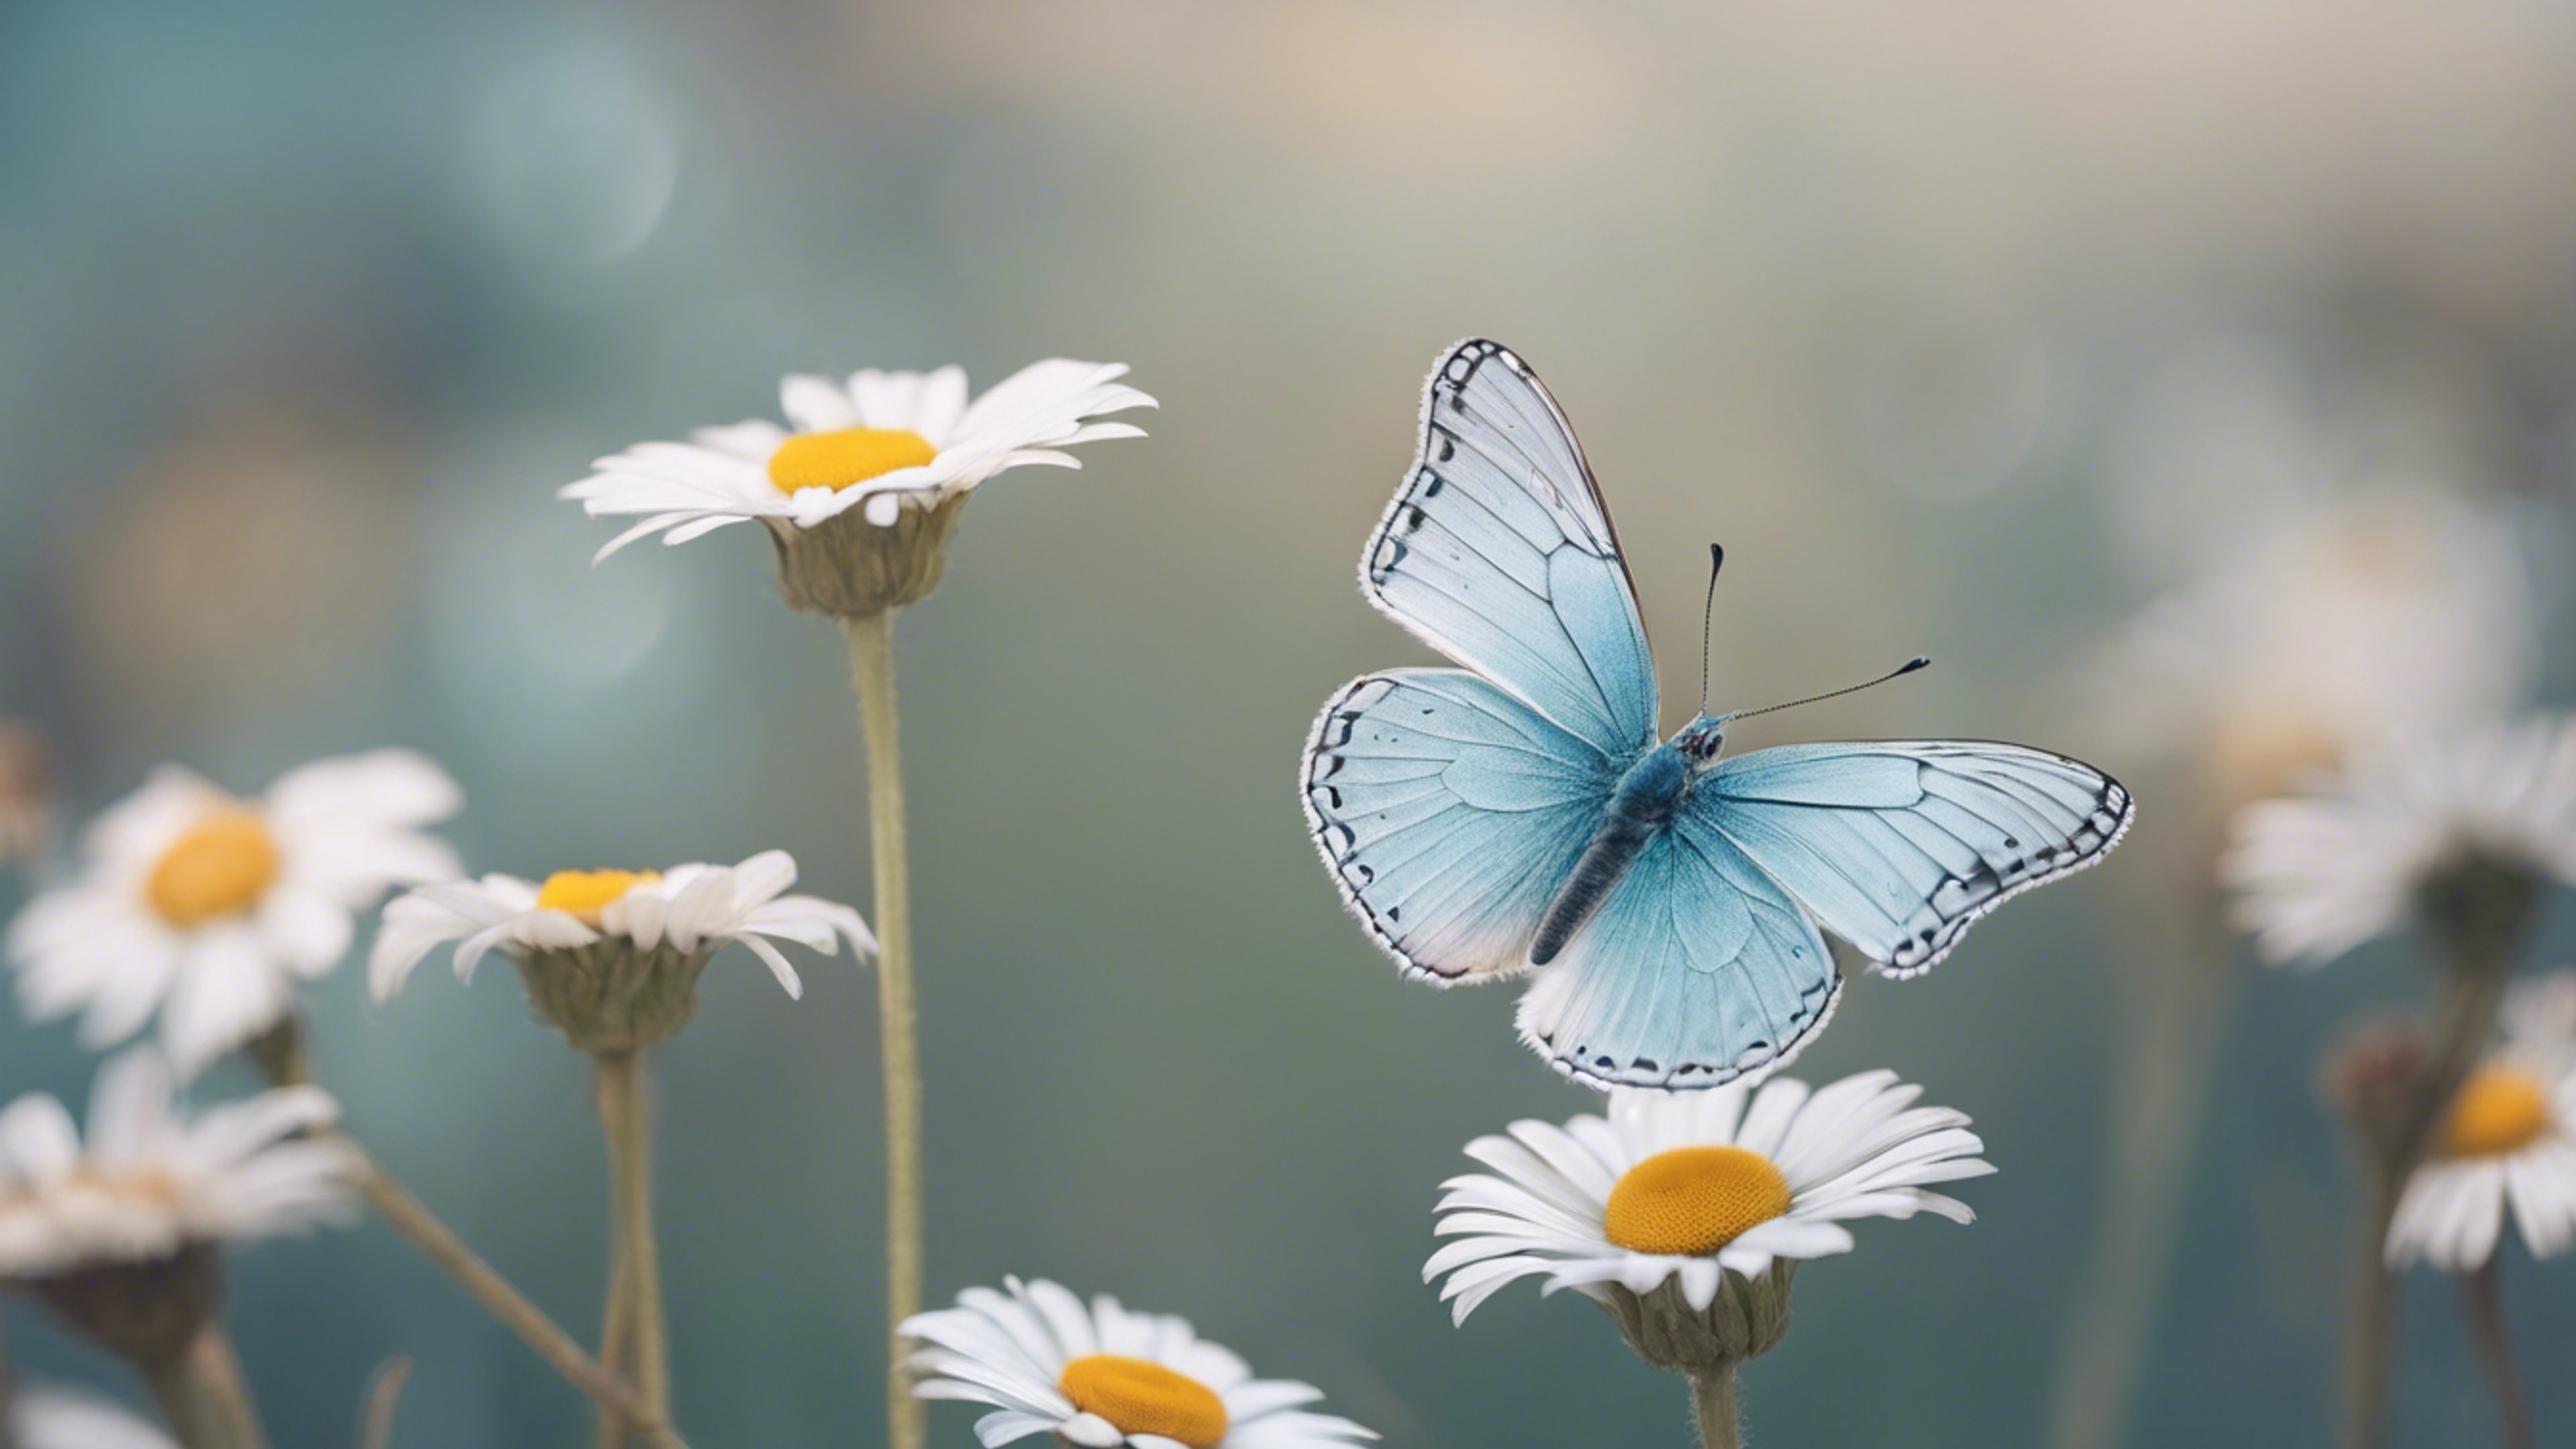 An intricately designed pastel blue butterfly resting on a blooming daisy.壁紙[d0f9e138e9b94f349937]